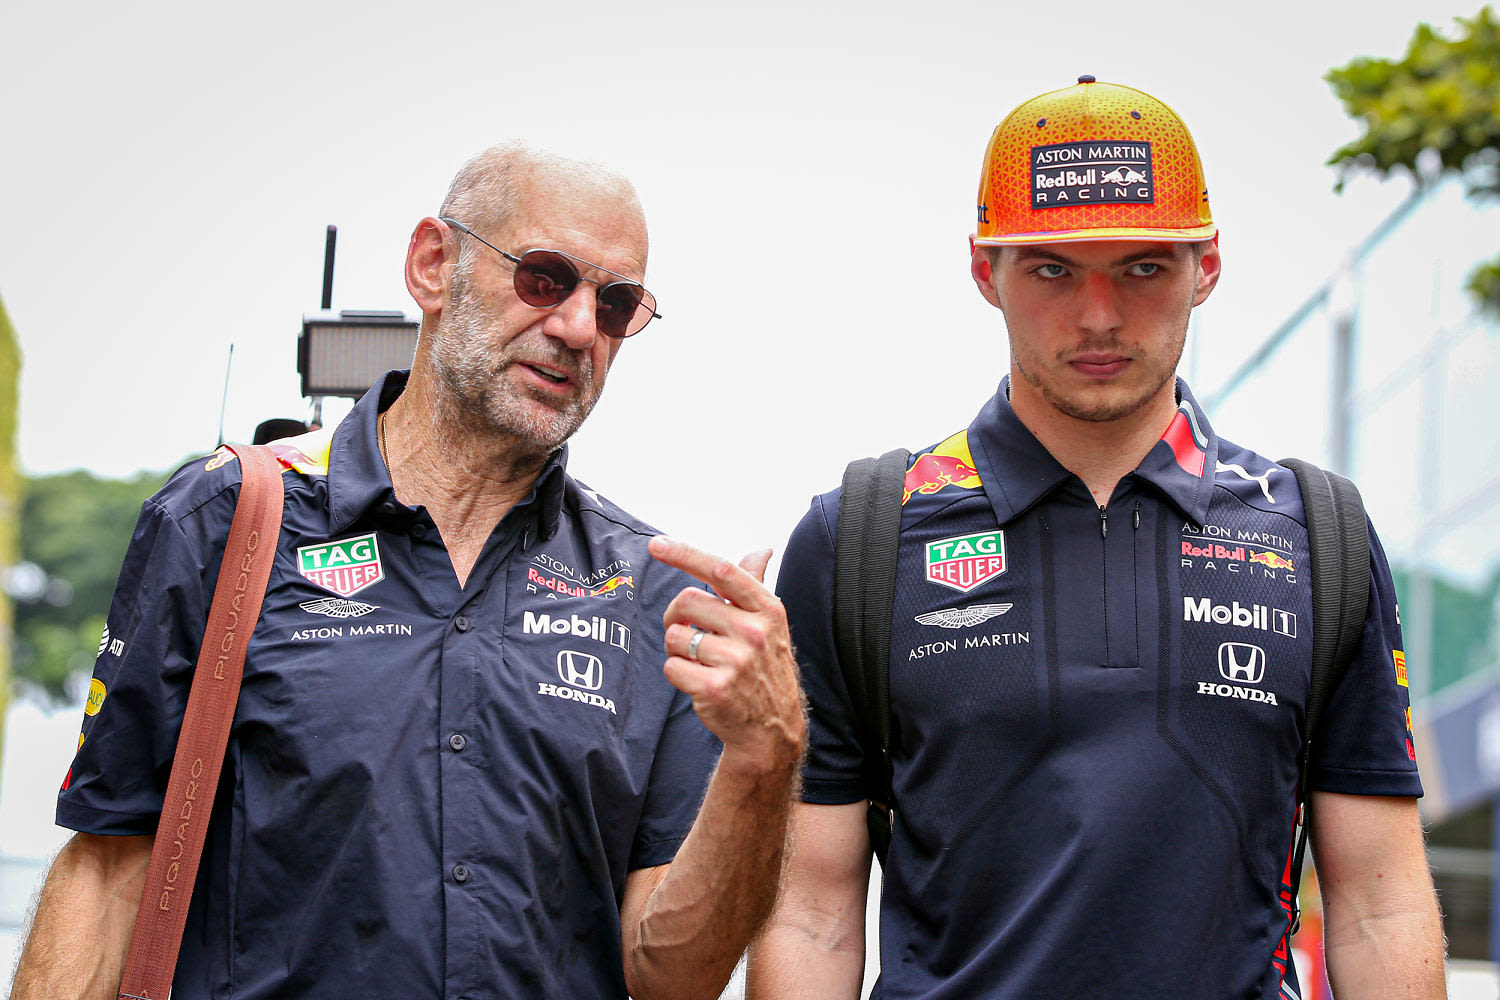 Red Bull is dominating Formula 1. But internally, the team is navigating turmoil.